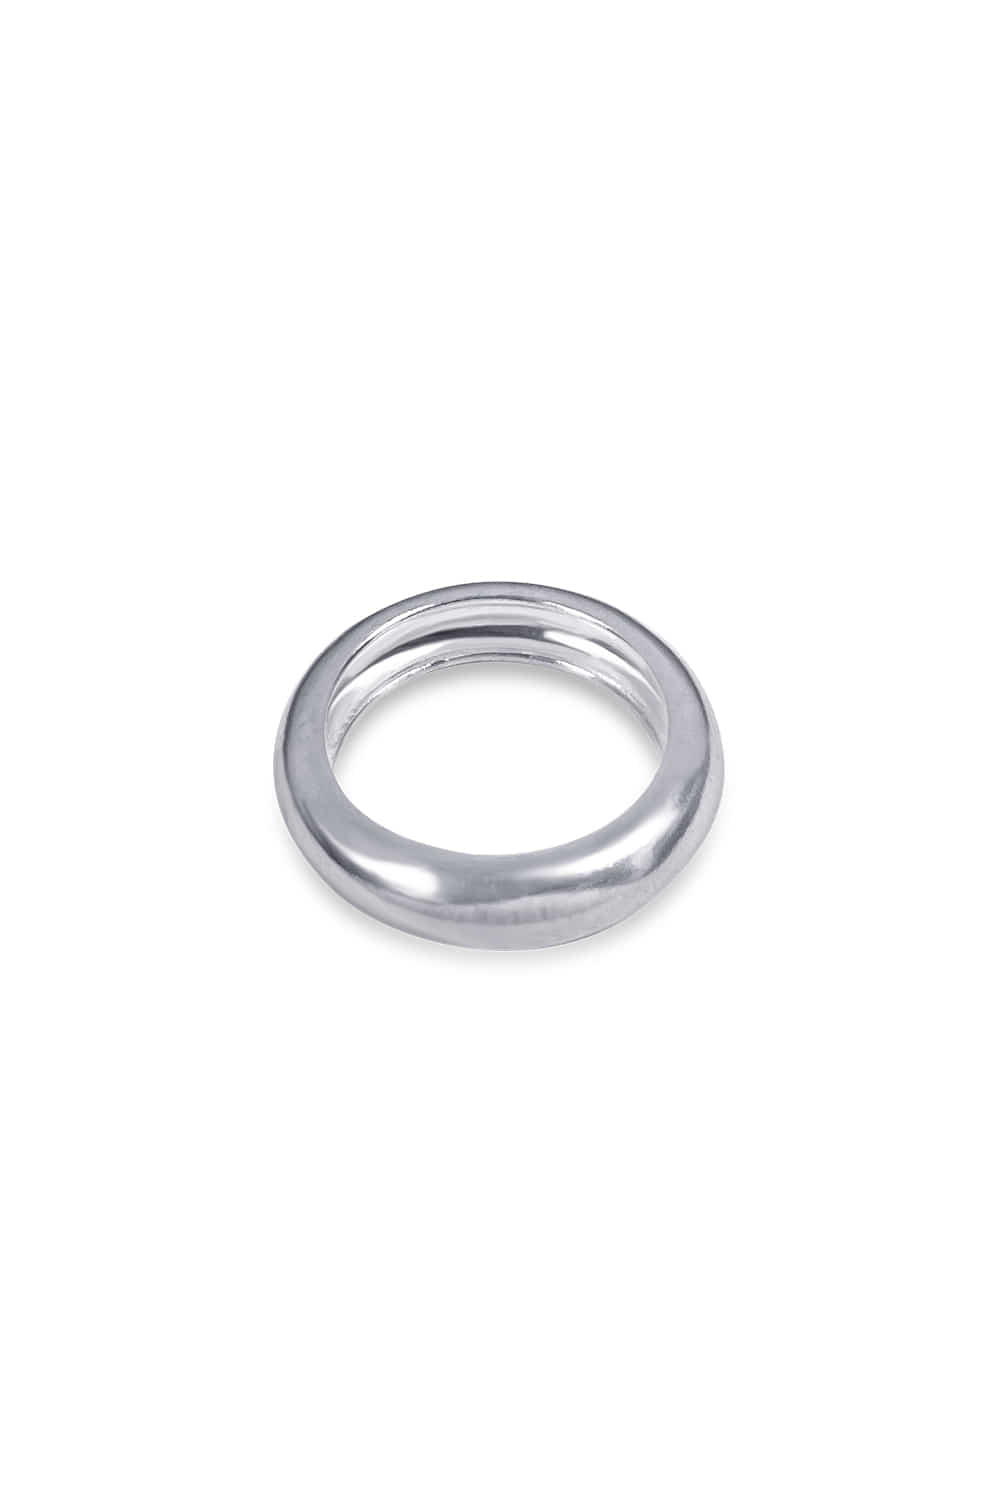 [925 silver] basic bold ring - gold,silver